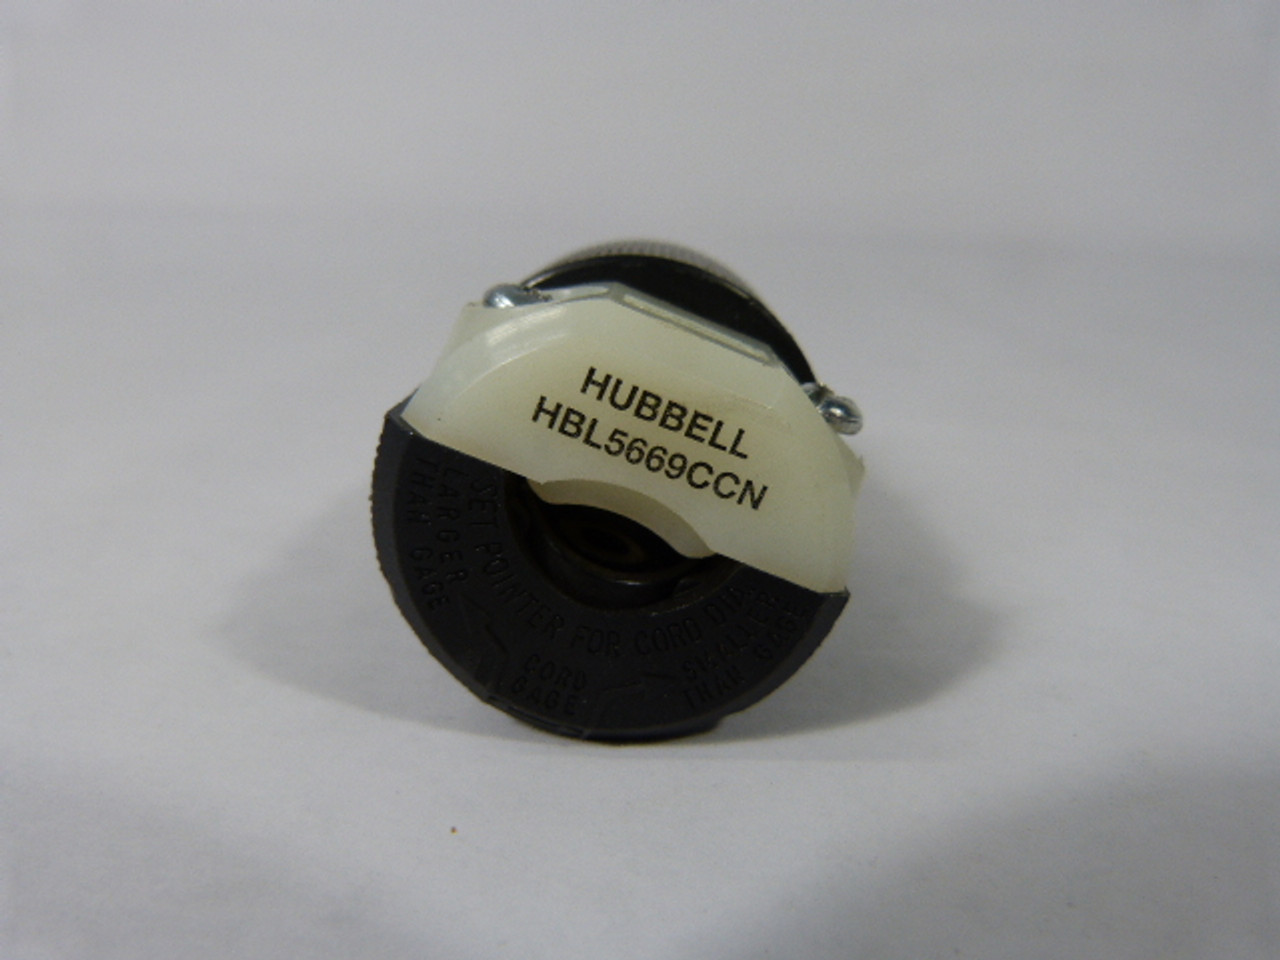 Hubbell HBL5669CCN Connector 15A 250V 3-Wire 2-Pole NOP